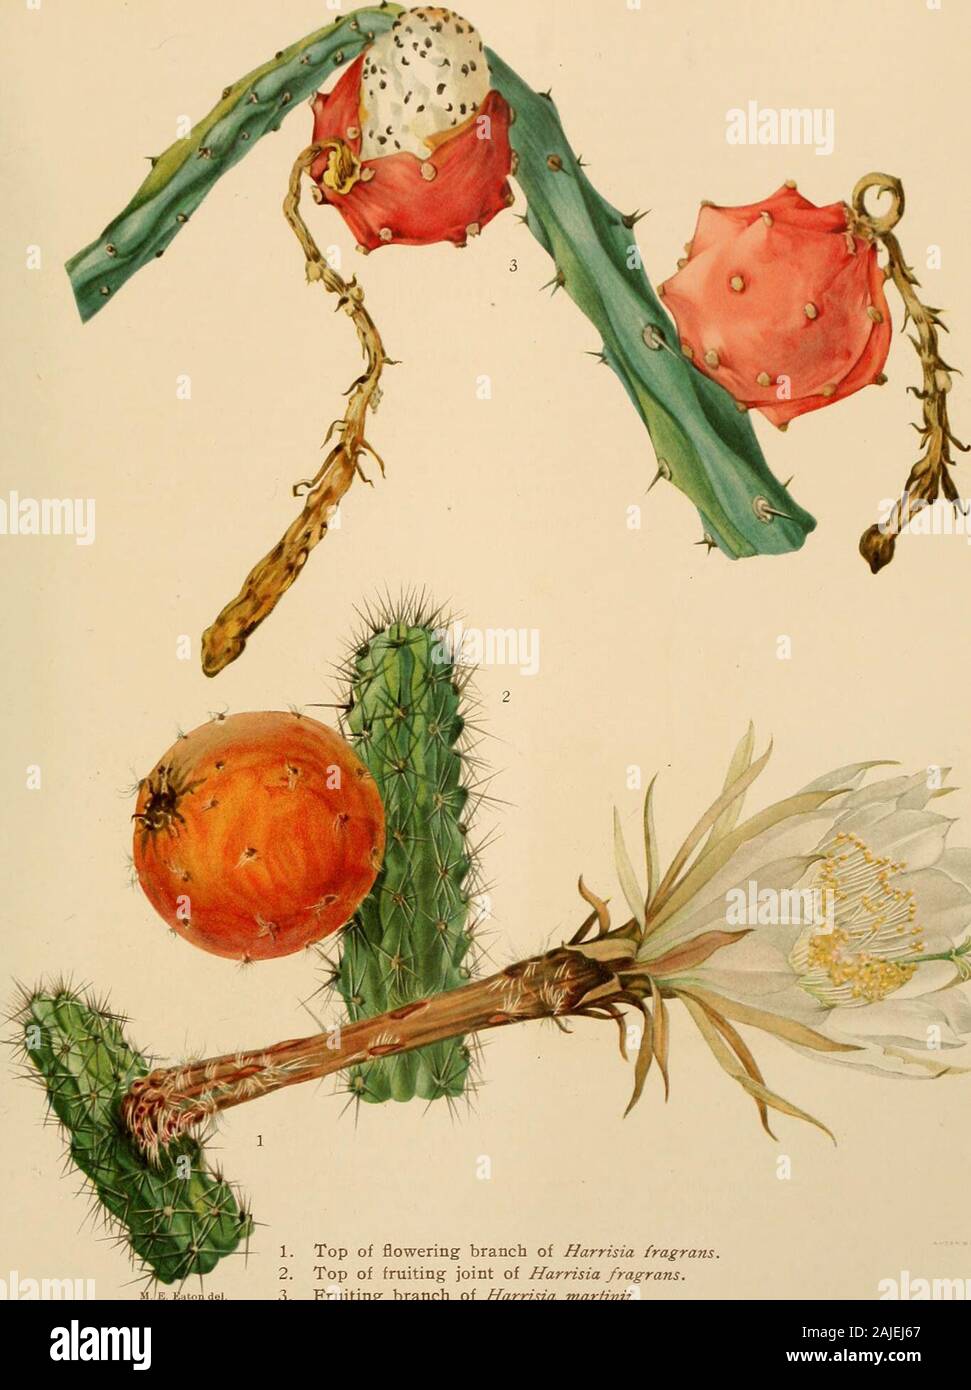 The Cactaceae : descriptions and illustrations of plants of the cactus family . Type locality: Near Ponce, Porto Rico. Distribution: Type locality and vicinity, and on the islands Mona and Desecheo. Plate xvii, figure 3, shows a fruiting branch of the plant from the type locality, paintedat the New York Botanical Garden in 1914. Figure 217 is from a photograph taken atthe type locality by Delia W. Marble in 1913. BRITTON AND ROSE, VOL. II. 1. Top of flowering branch of Harrisia fragrans. 2. Top of fruiting joint of Harrisia fragrans. 3. Fruiting branch of Harrisia martinii. (All natural size ) Stock Photo